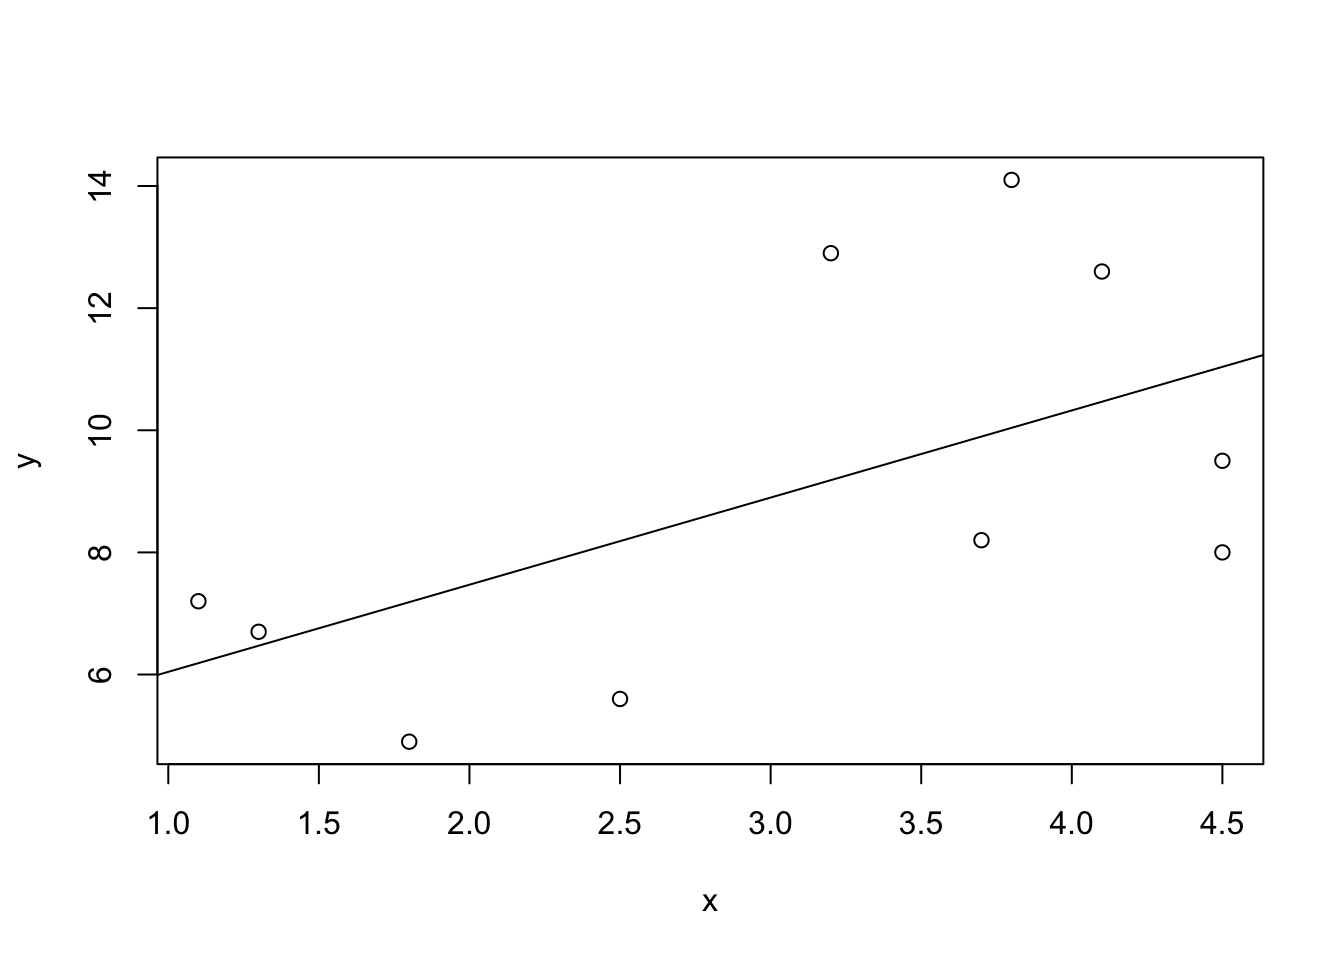 A Fitted Regression Line